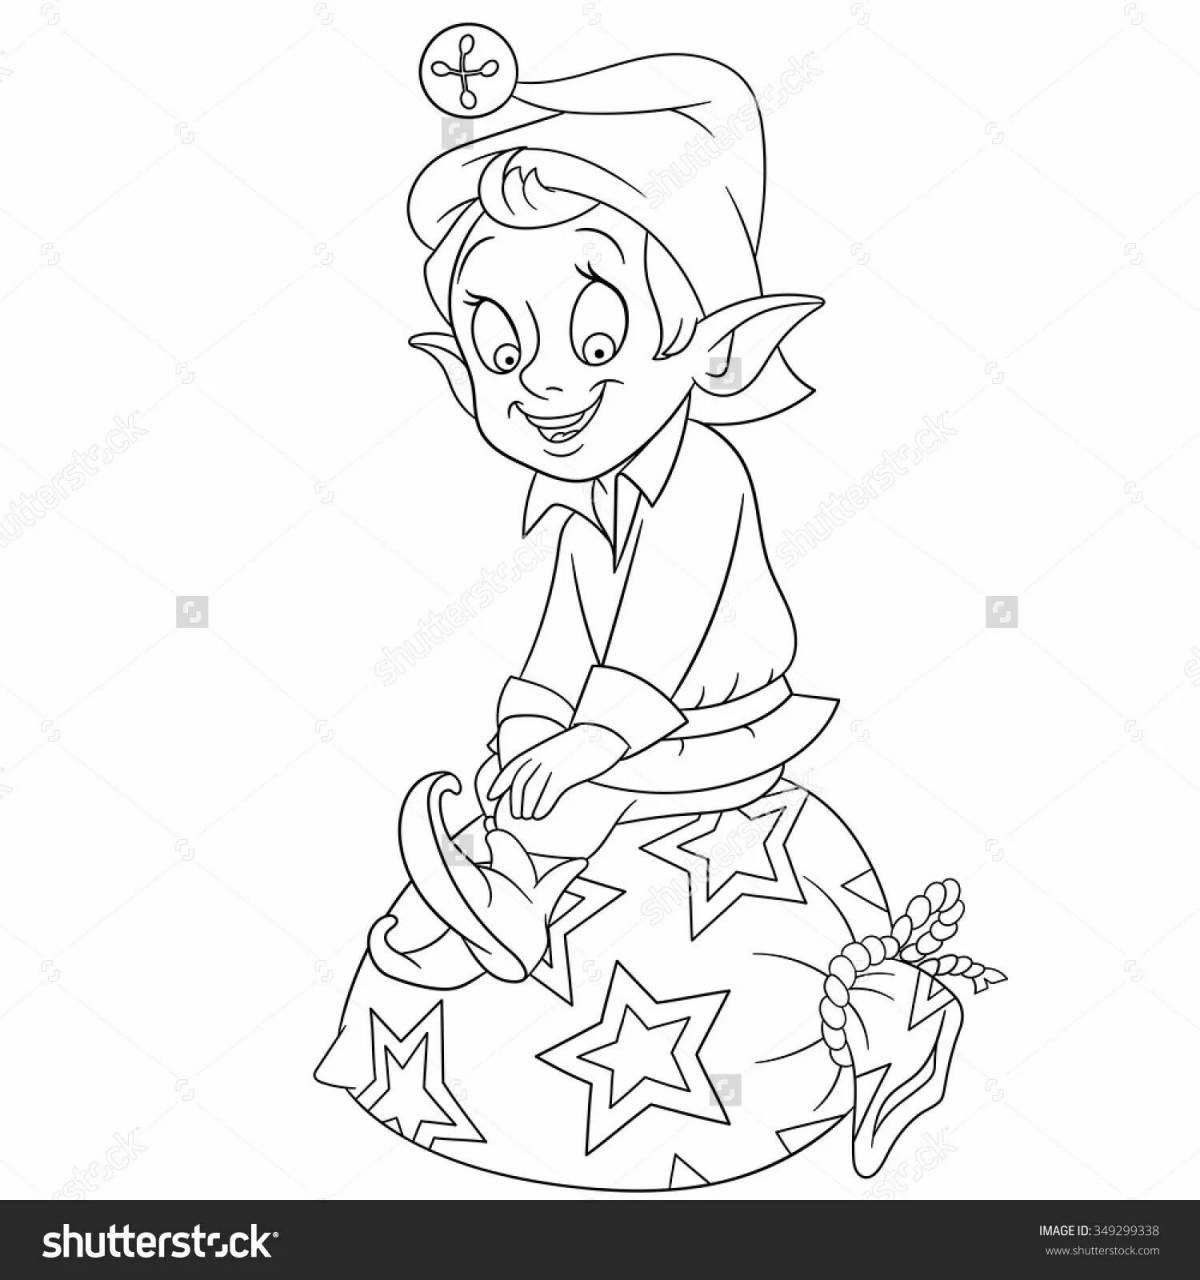 Animated christmas elf coloring book